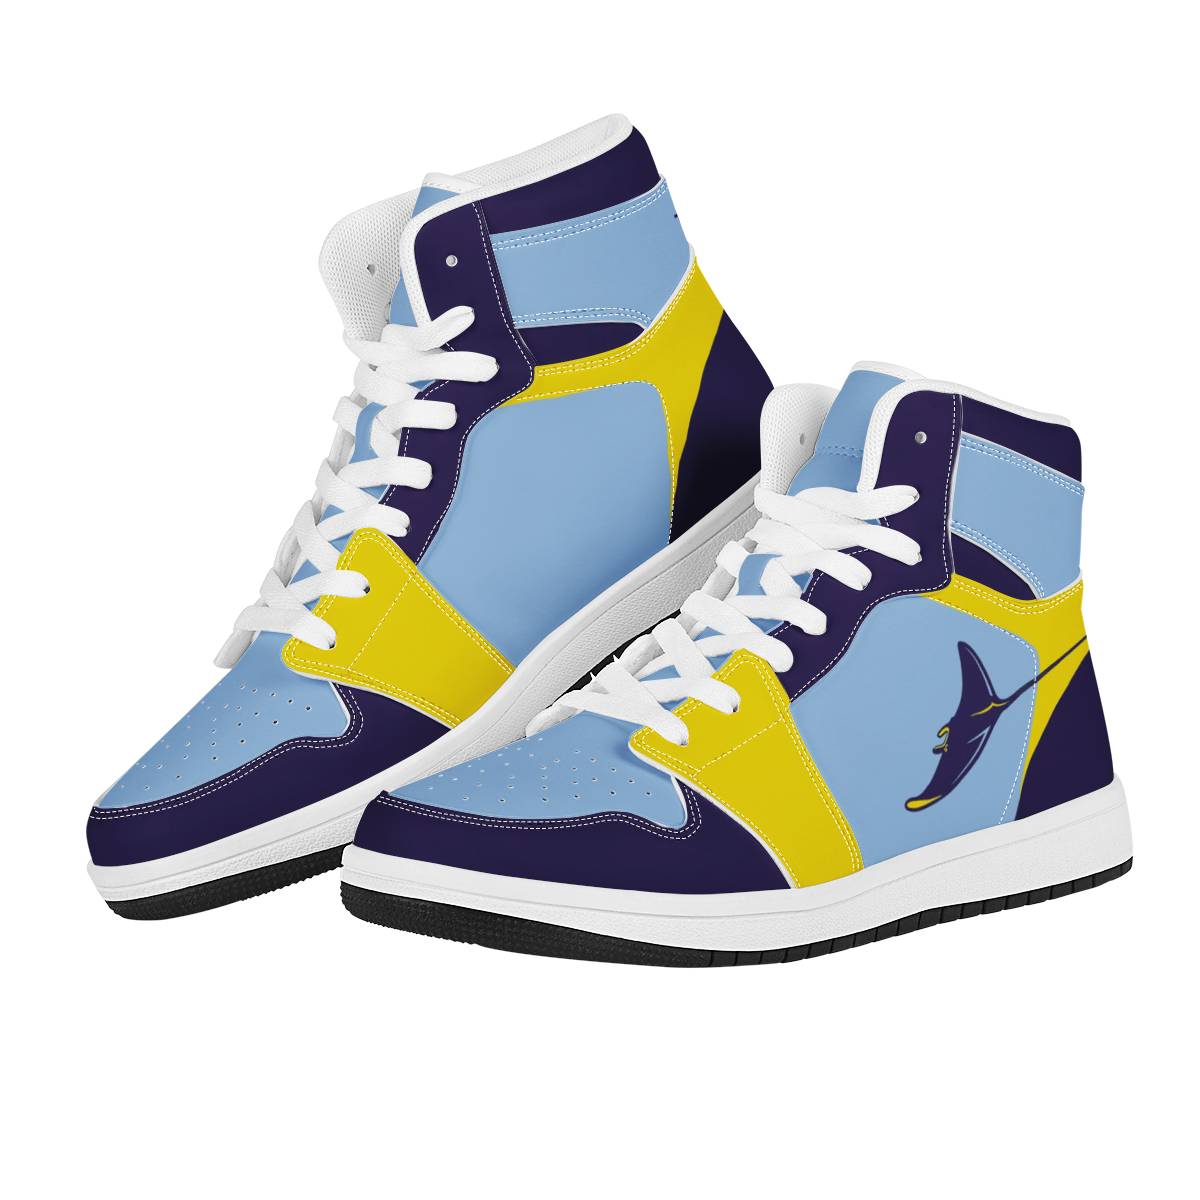 Women's Tampa Bay Rays High Top Leather AJ1 Sneakers 002